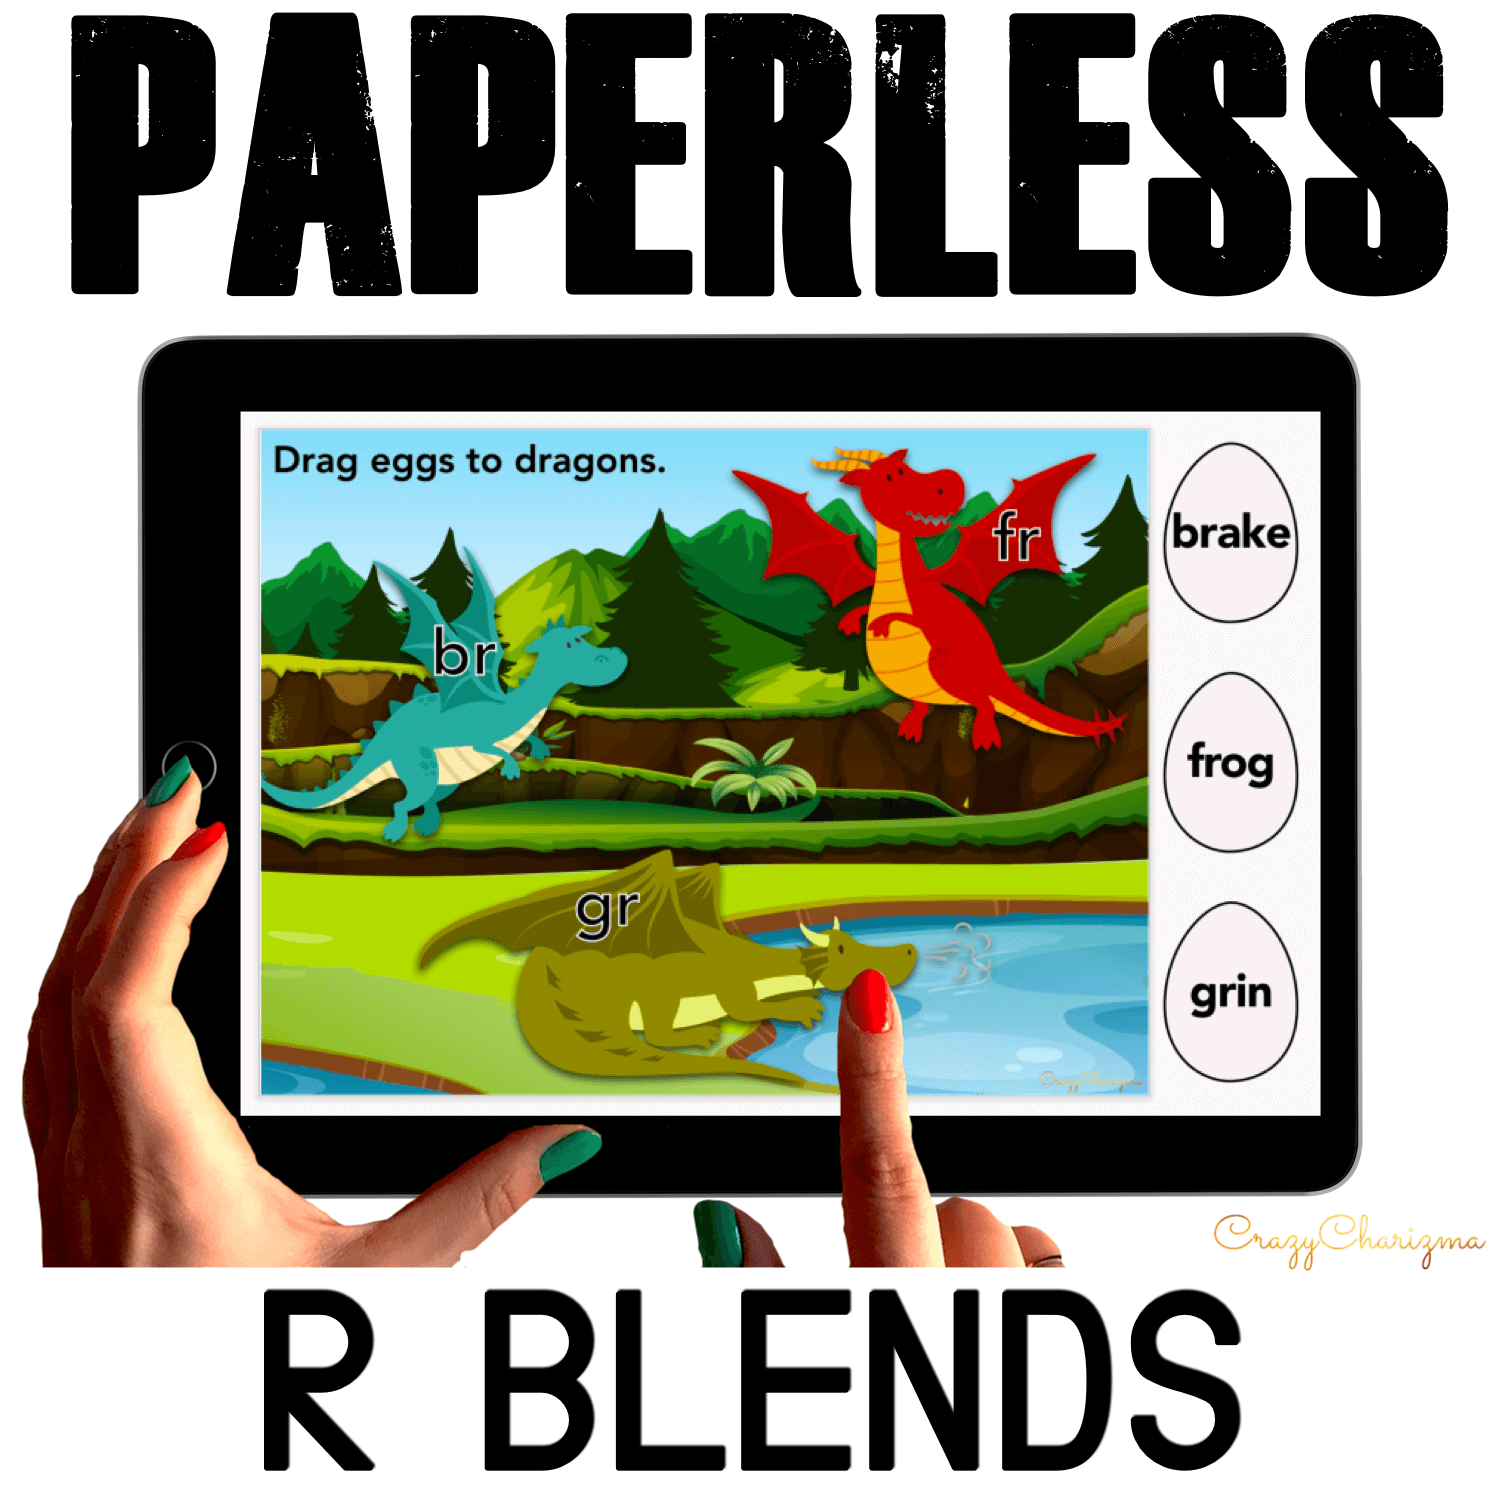 Need to practice beginning R BLENDS in a fun way? Check out these interactive activities for Google Classroom. Kids will drag words and match them with the corresponding blends (eggs and dragons theme).